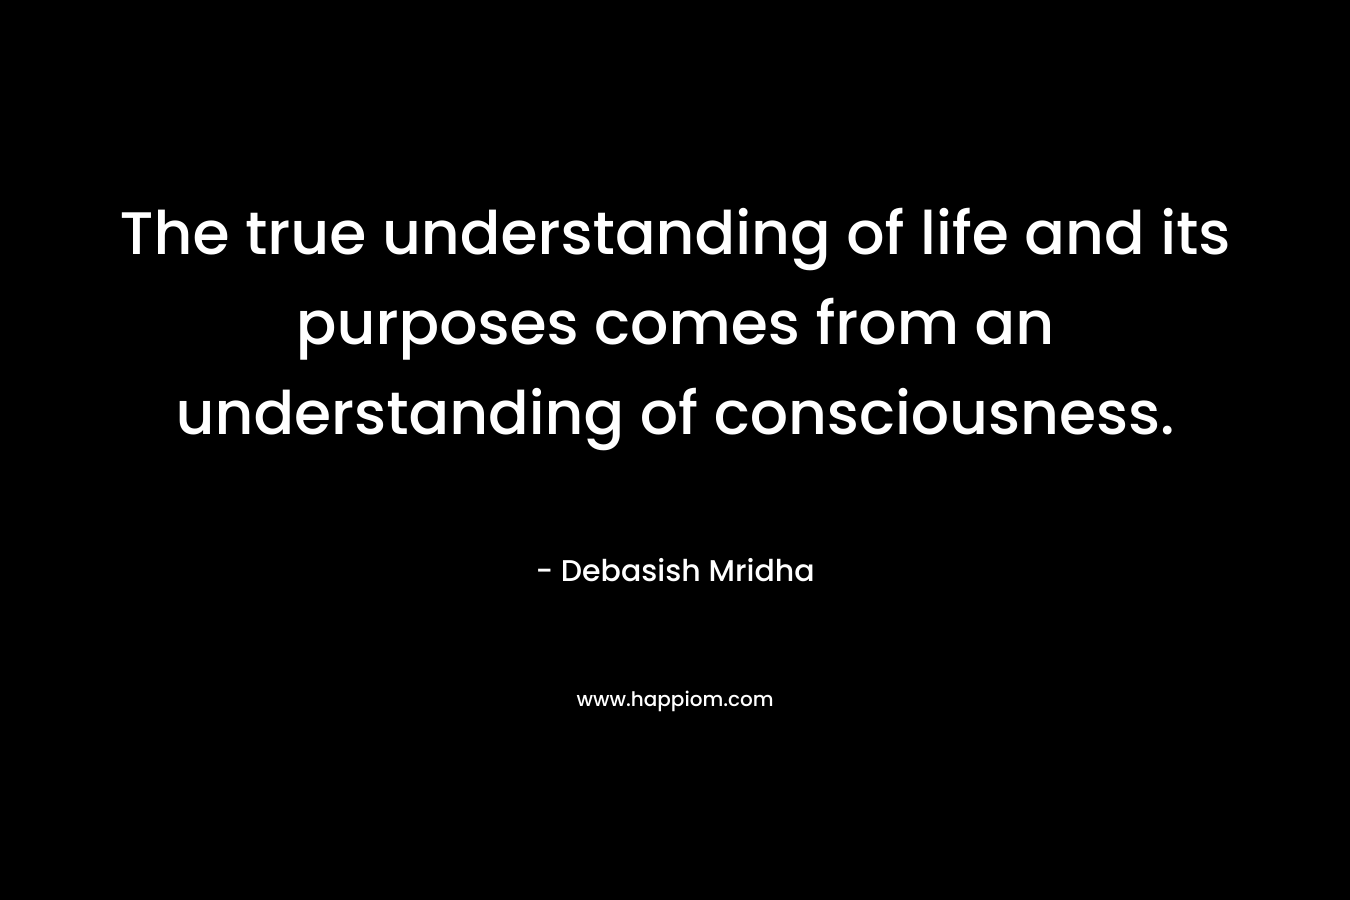 The true understanding of life and its purposes comes from an understanding of consciousness.